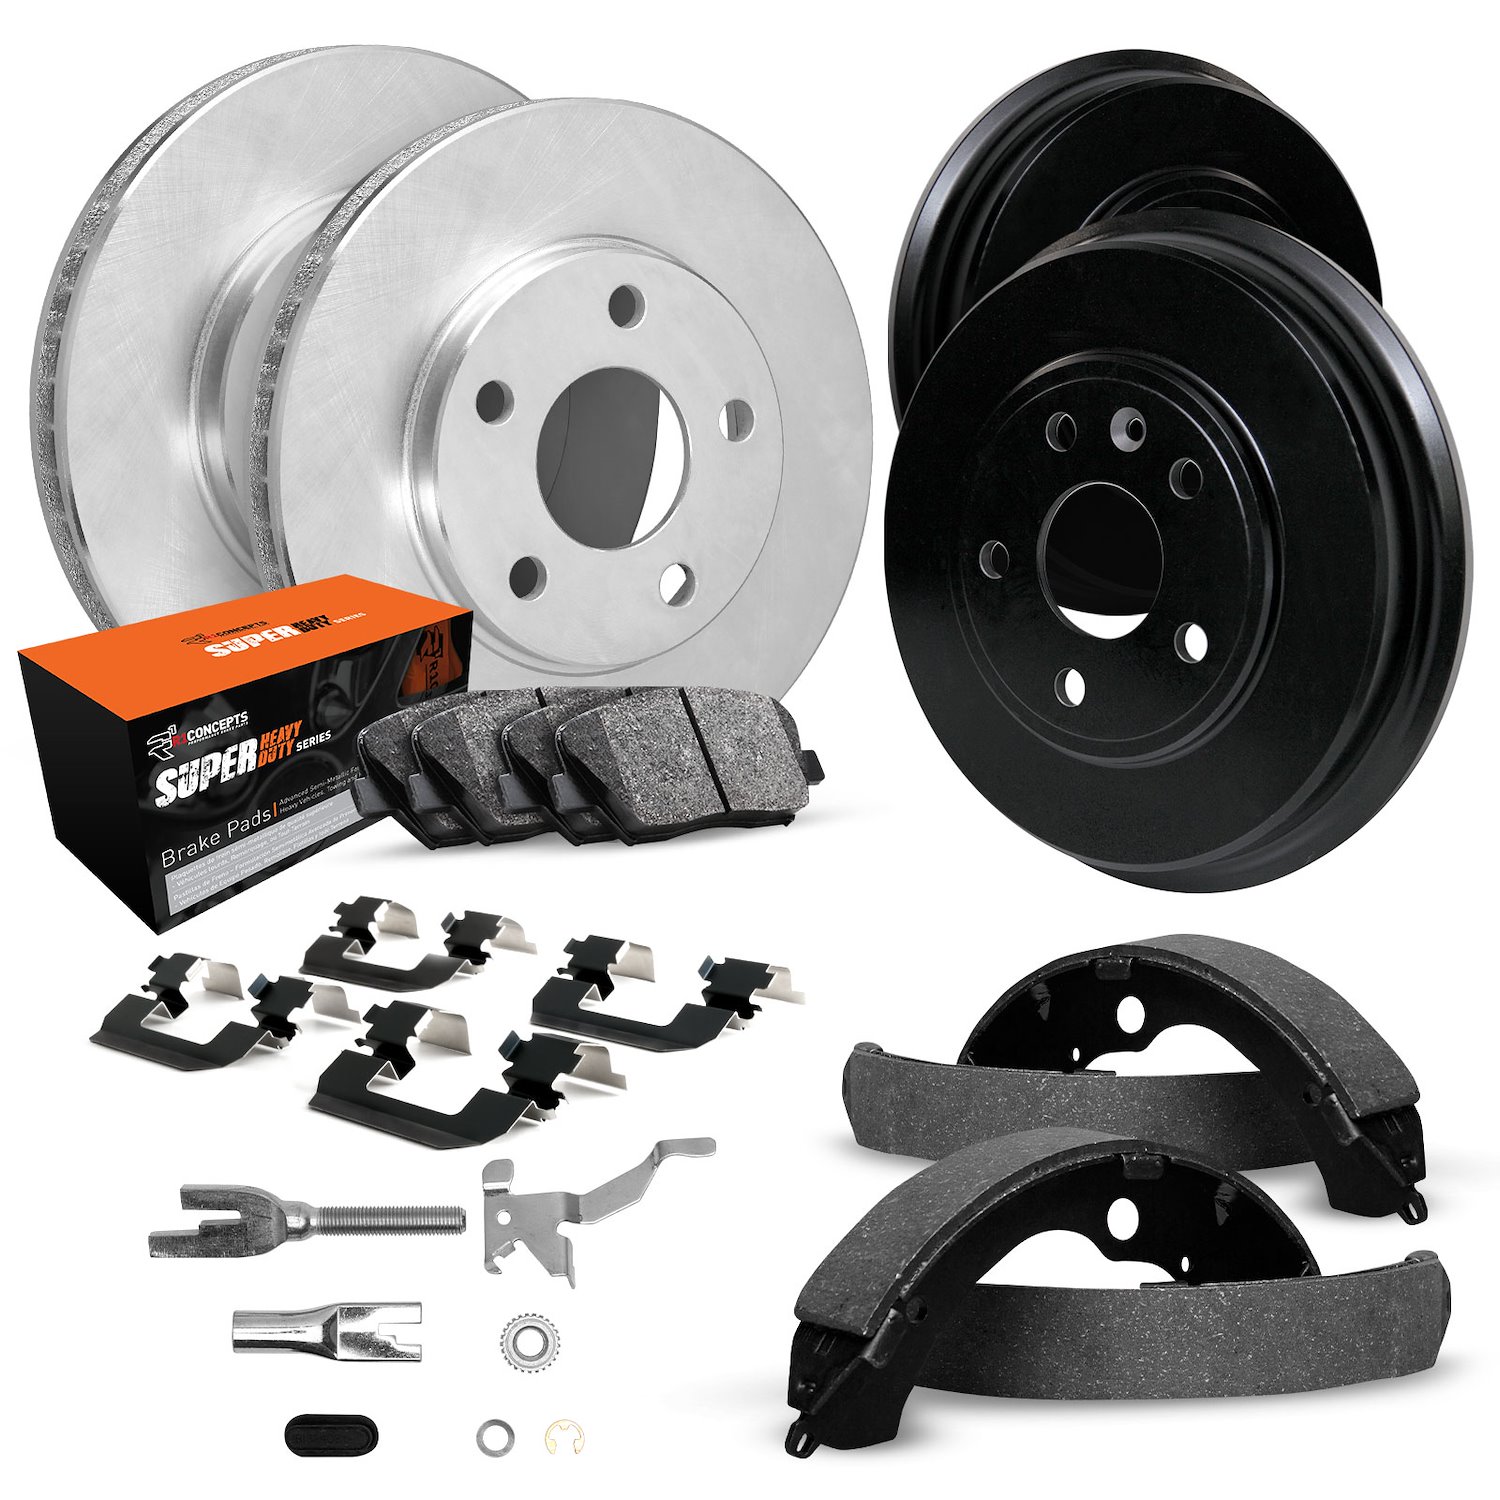 E-Line Blank Brake Rotor & Drum Set w/Super-Duty Pads, Shoes, Hardware, & Adjusters, 1982-1982 GM, Position: Front & Rear